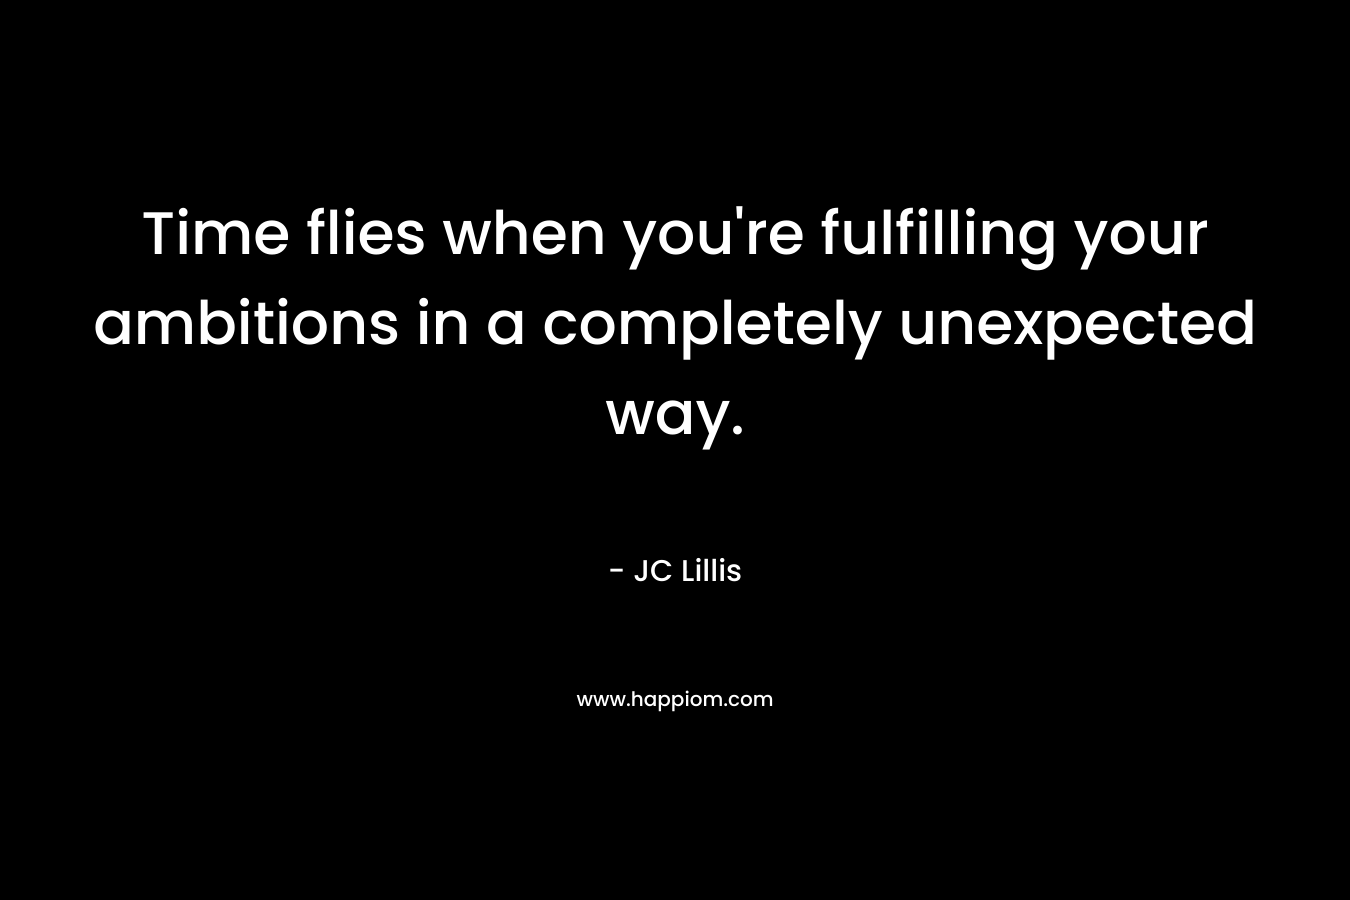 Time flies when you’re fulfilling your ambitions in a completely unexpected way. – JC Lillis